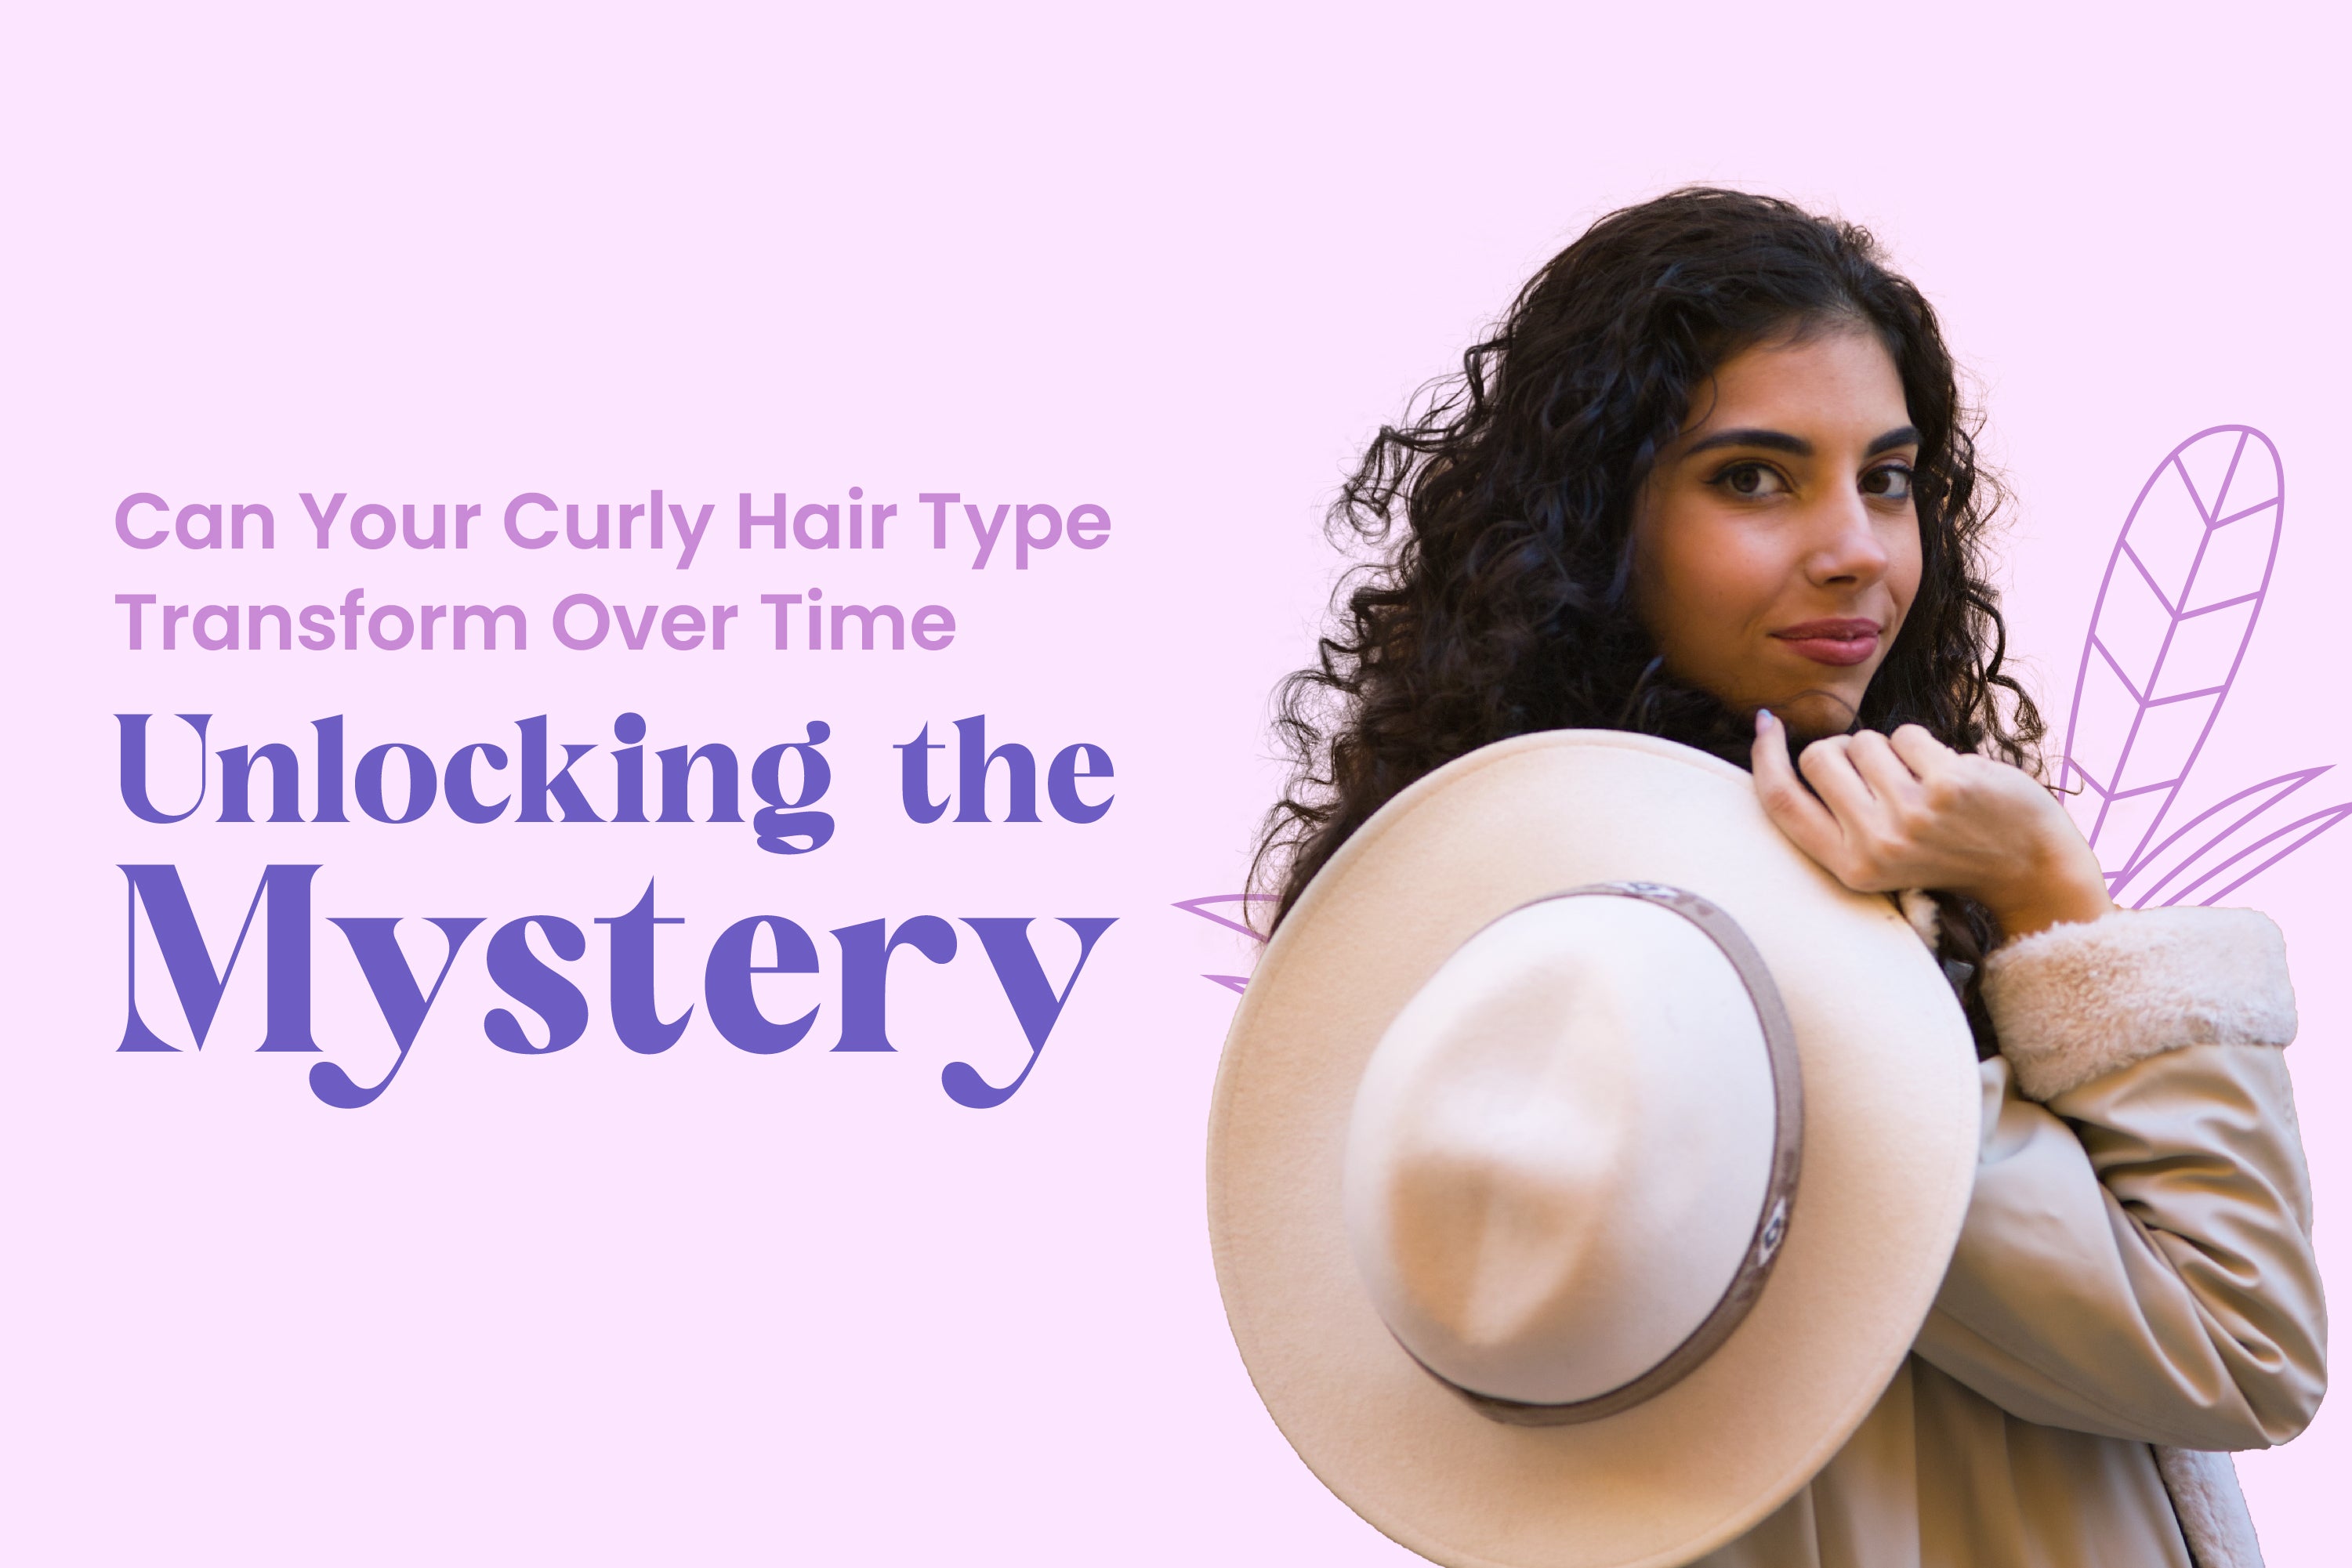 Can Your Curly Hair Type Transform Over Time - Unlocking the Mystery